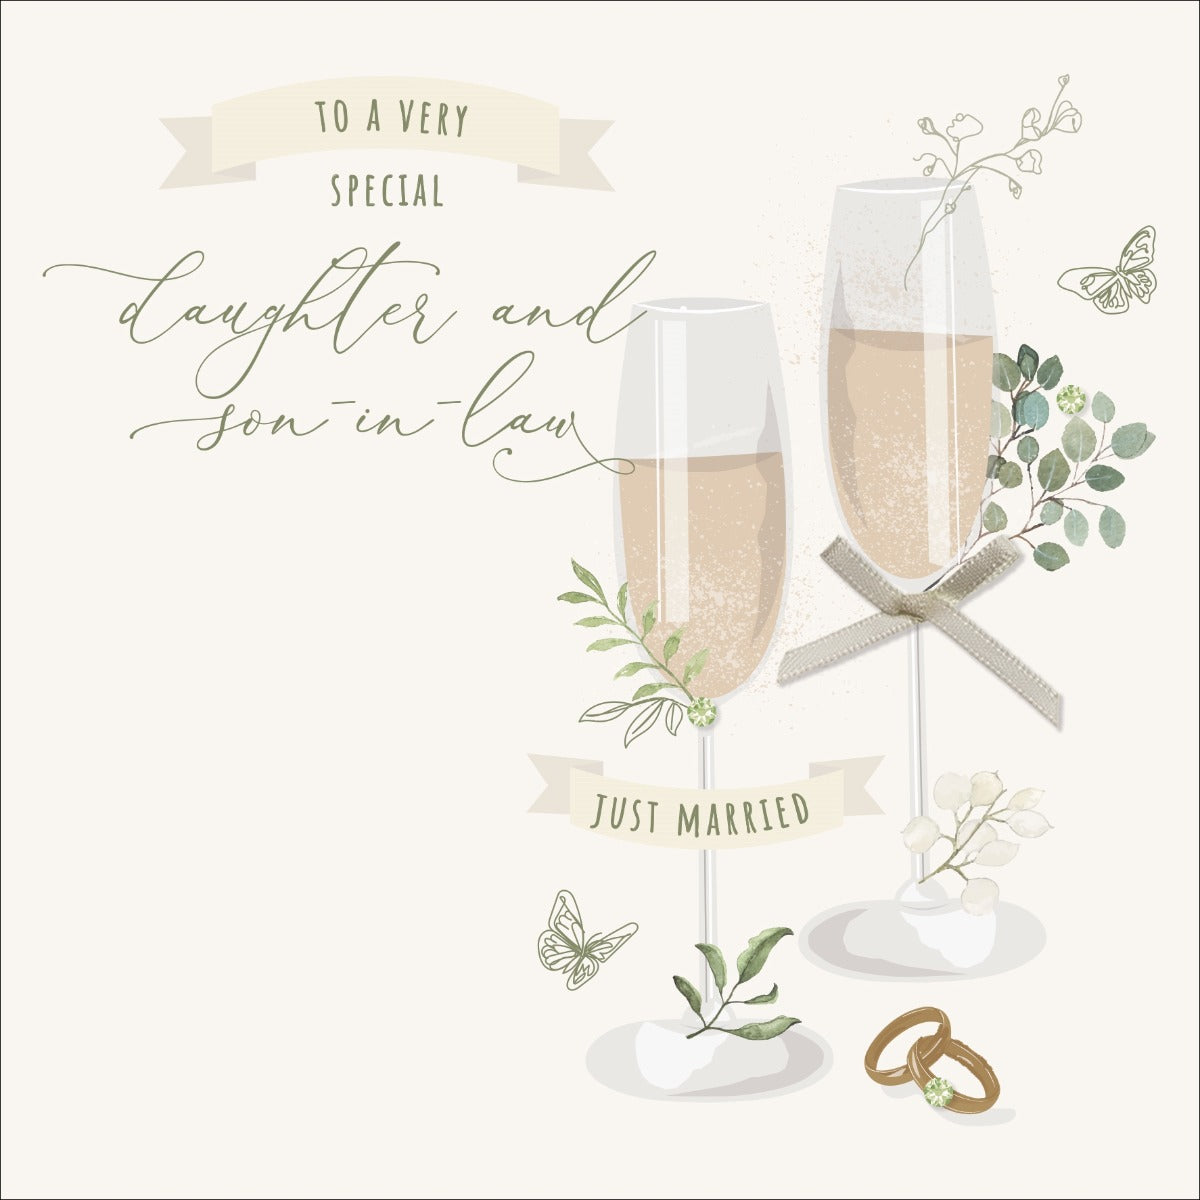 To a Very Special Daughter & Son-in-Law, just married